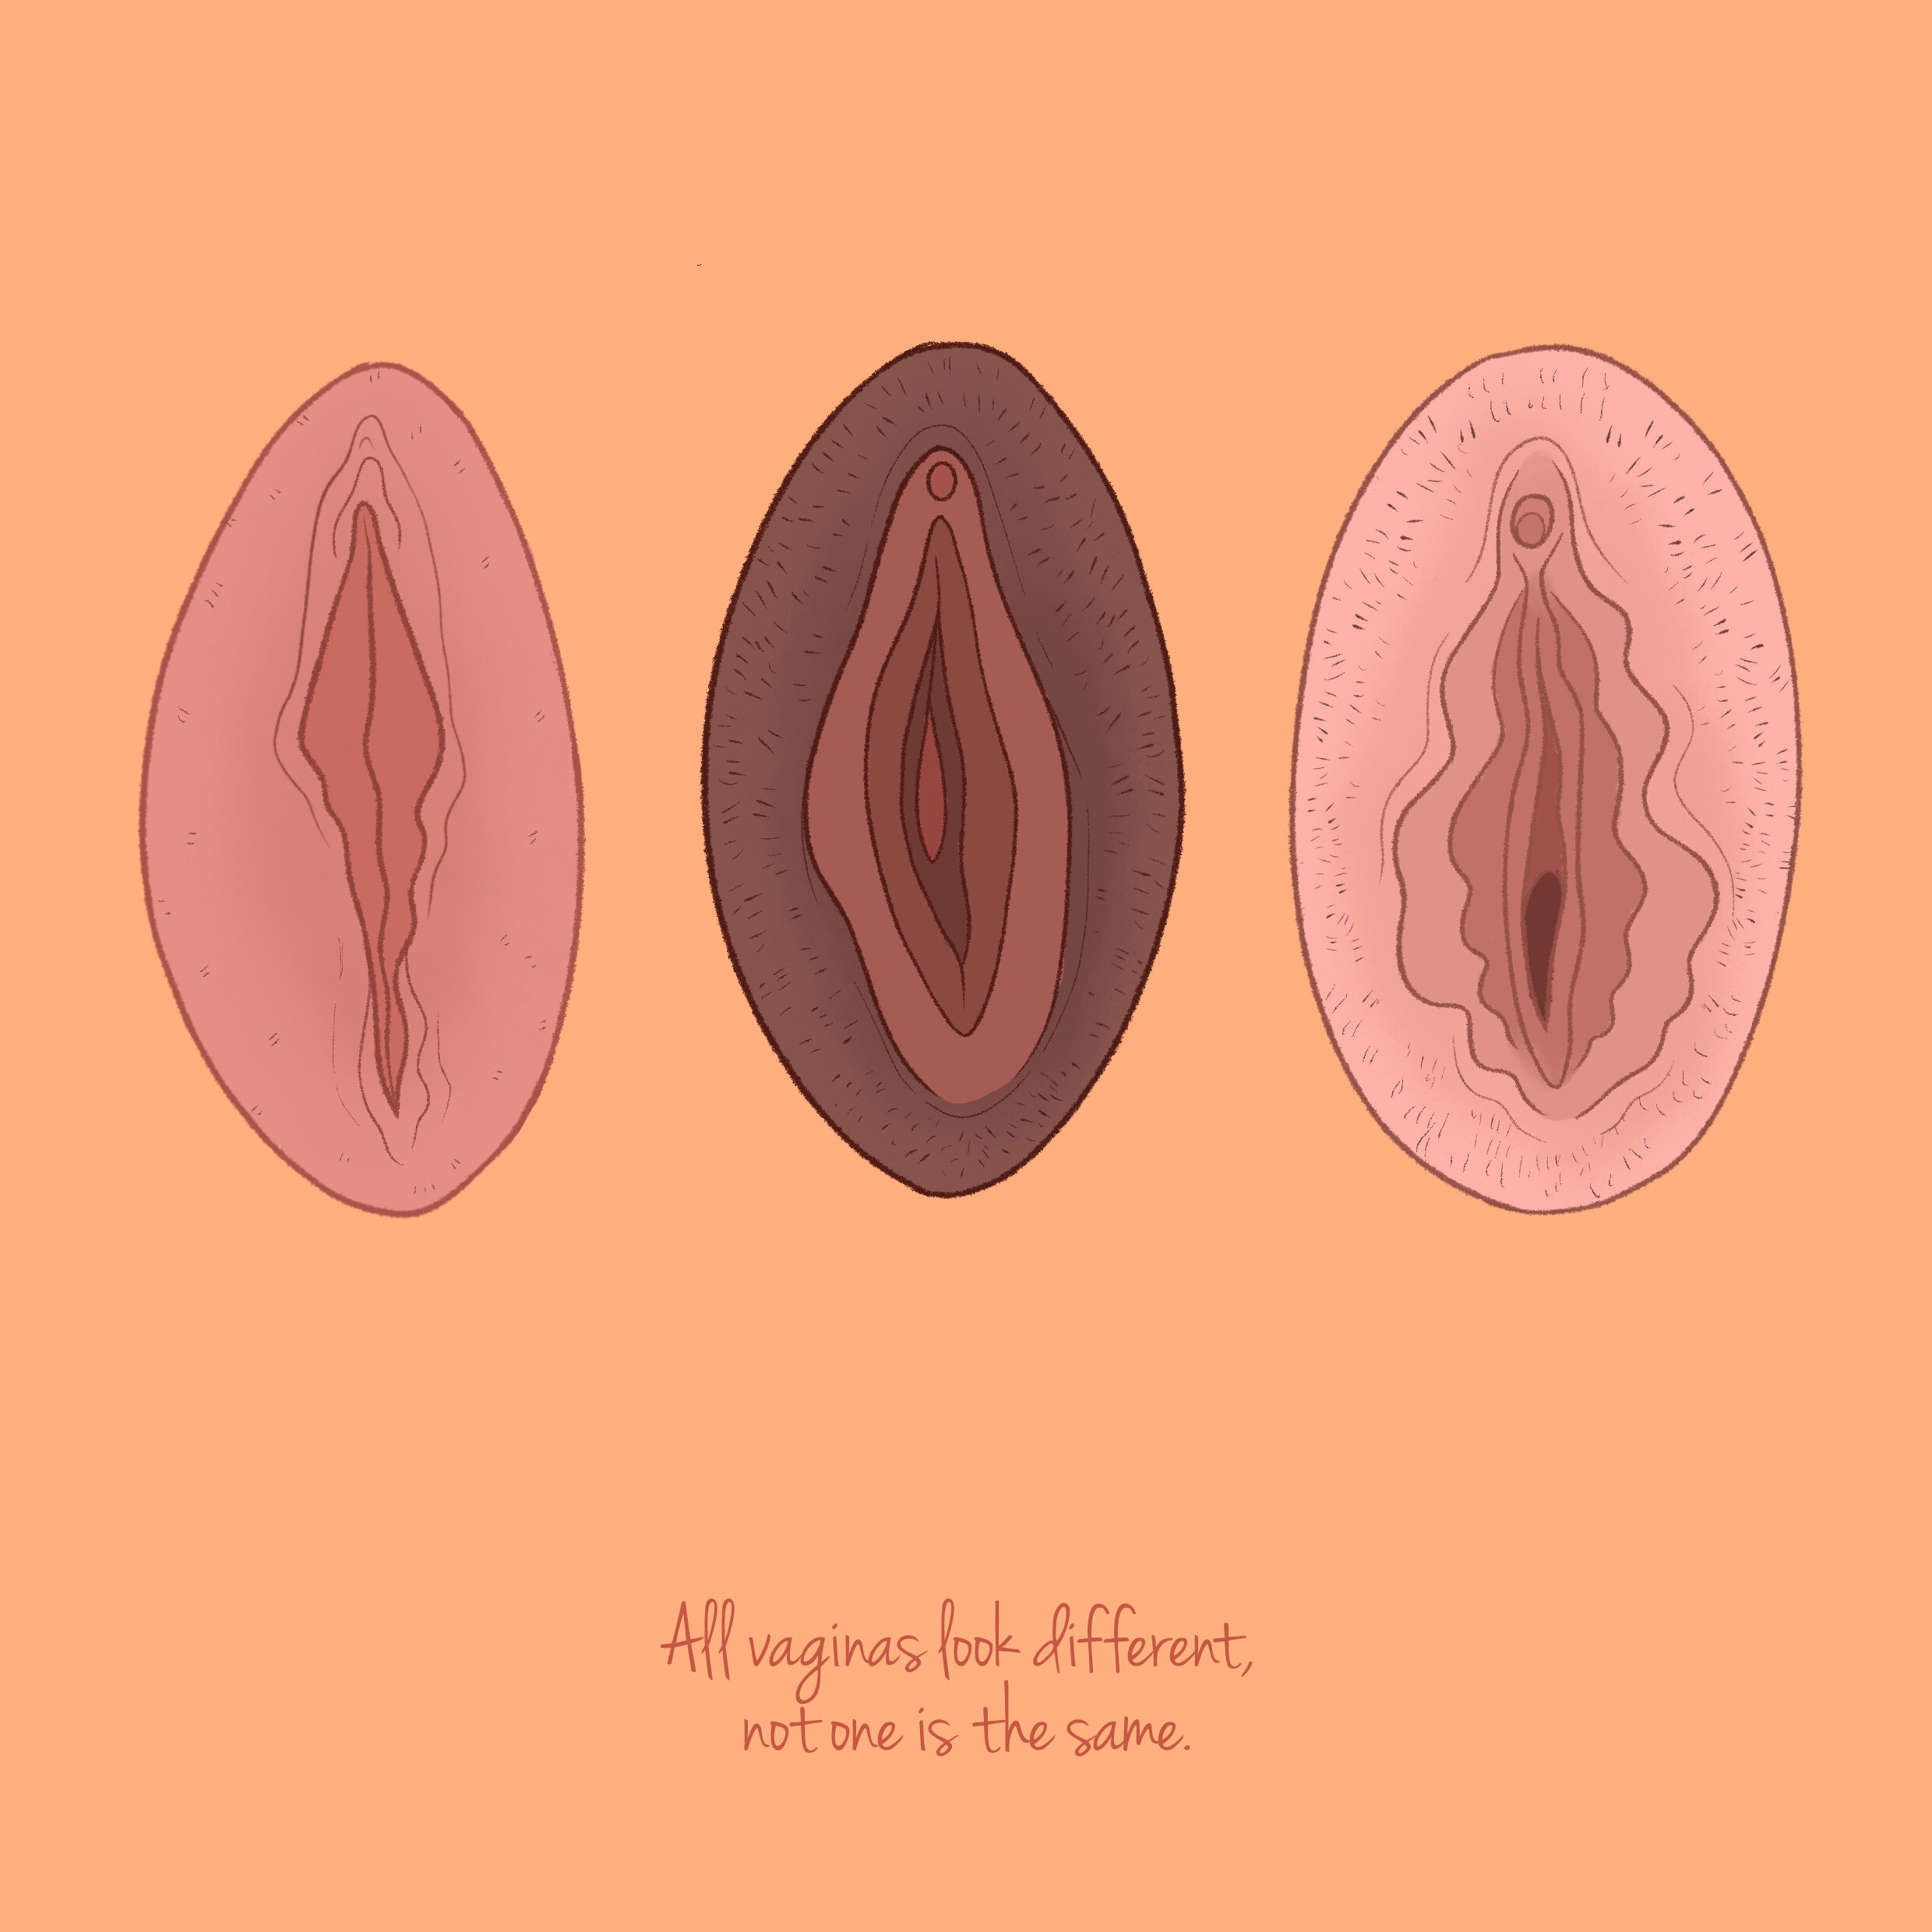 MYTH If you have lots of sex, your vagina will get loose — Vagina Museum pic